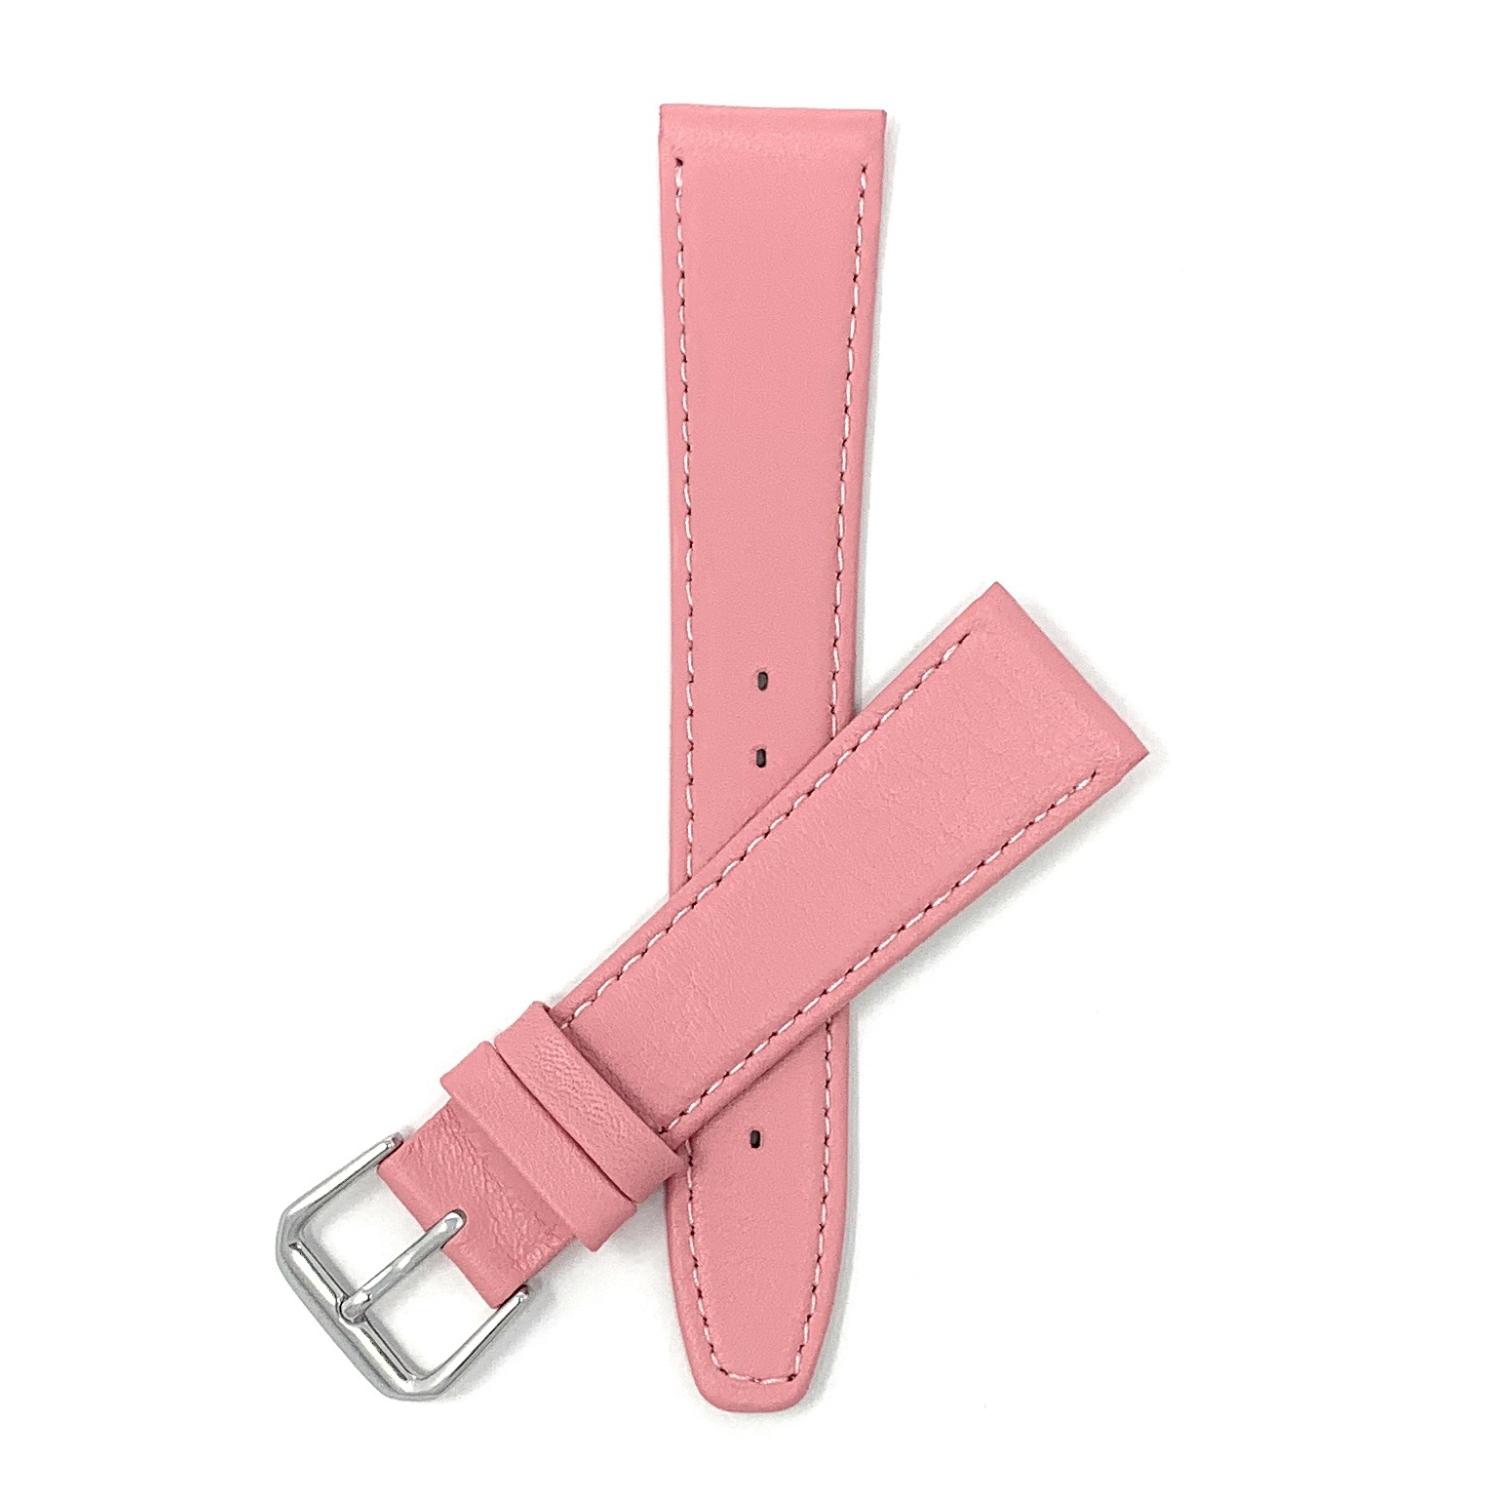 Bandini Classic Thin Leather Smart Watch Band Strap, Stitch For Withings Nokia Scanwatch, Steel HR 36mm, Move ECG - 18mm, Pink / Silver Buckle